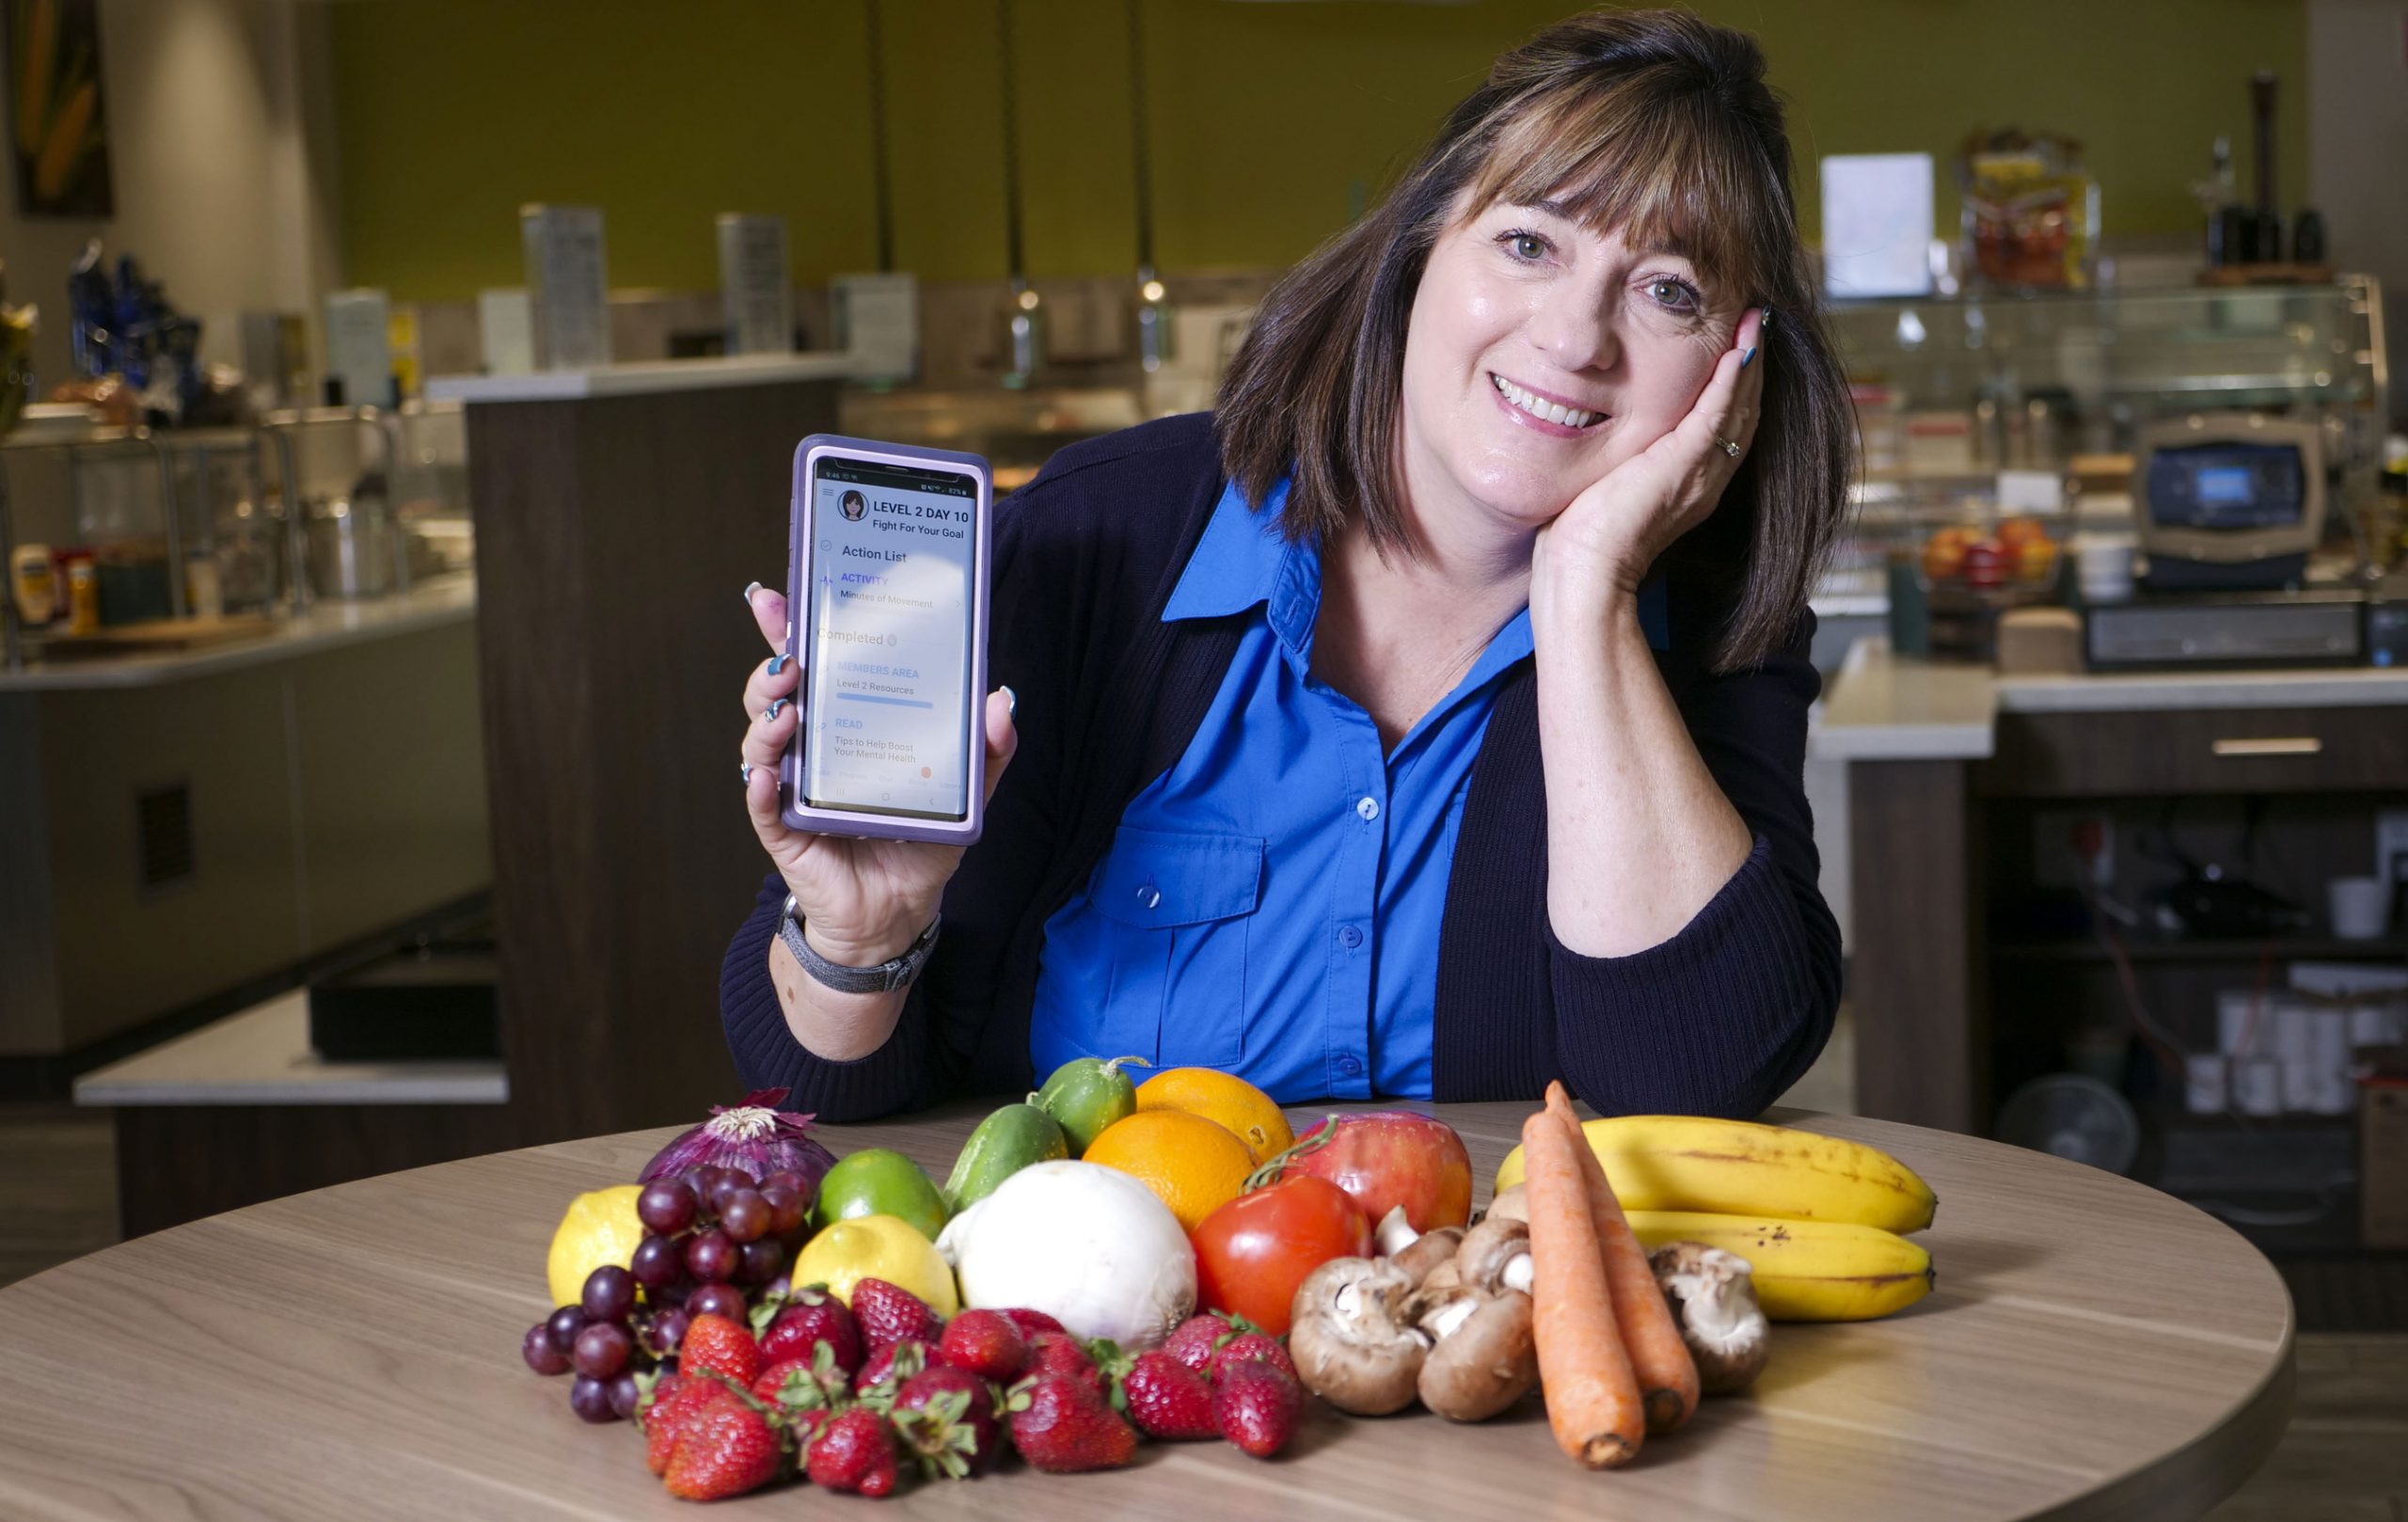 Veggies and fruits galore are the reason for Blue Shield of California employee Kim Stotler’s  smile. “I feel really good for the first time in years,” says Stotler, who lost nearly 20 pounds in the first month of the nonprofit health plan’s new Wellvolution digital lifestyle medicine program. The clinically proven health digital platform gives participating members access to clinically proven health-management resources – the largest in the industry - at no extra cost.